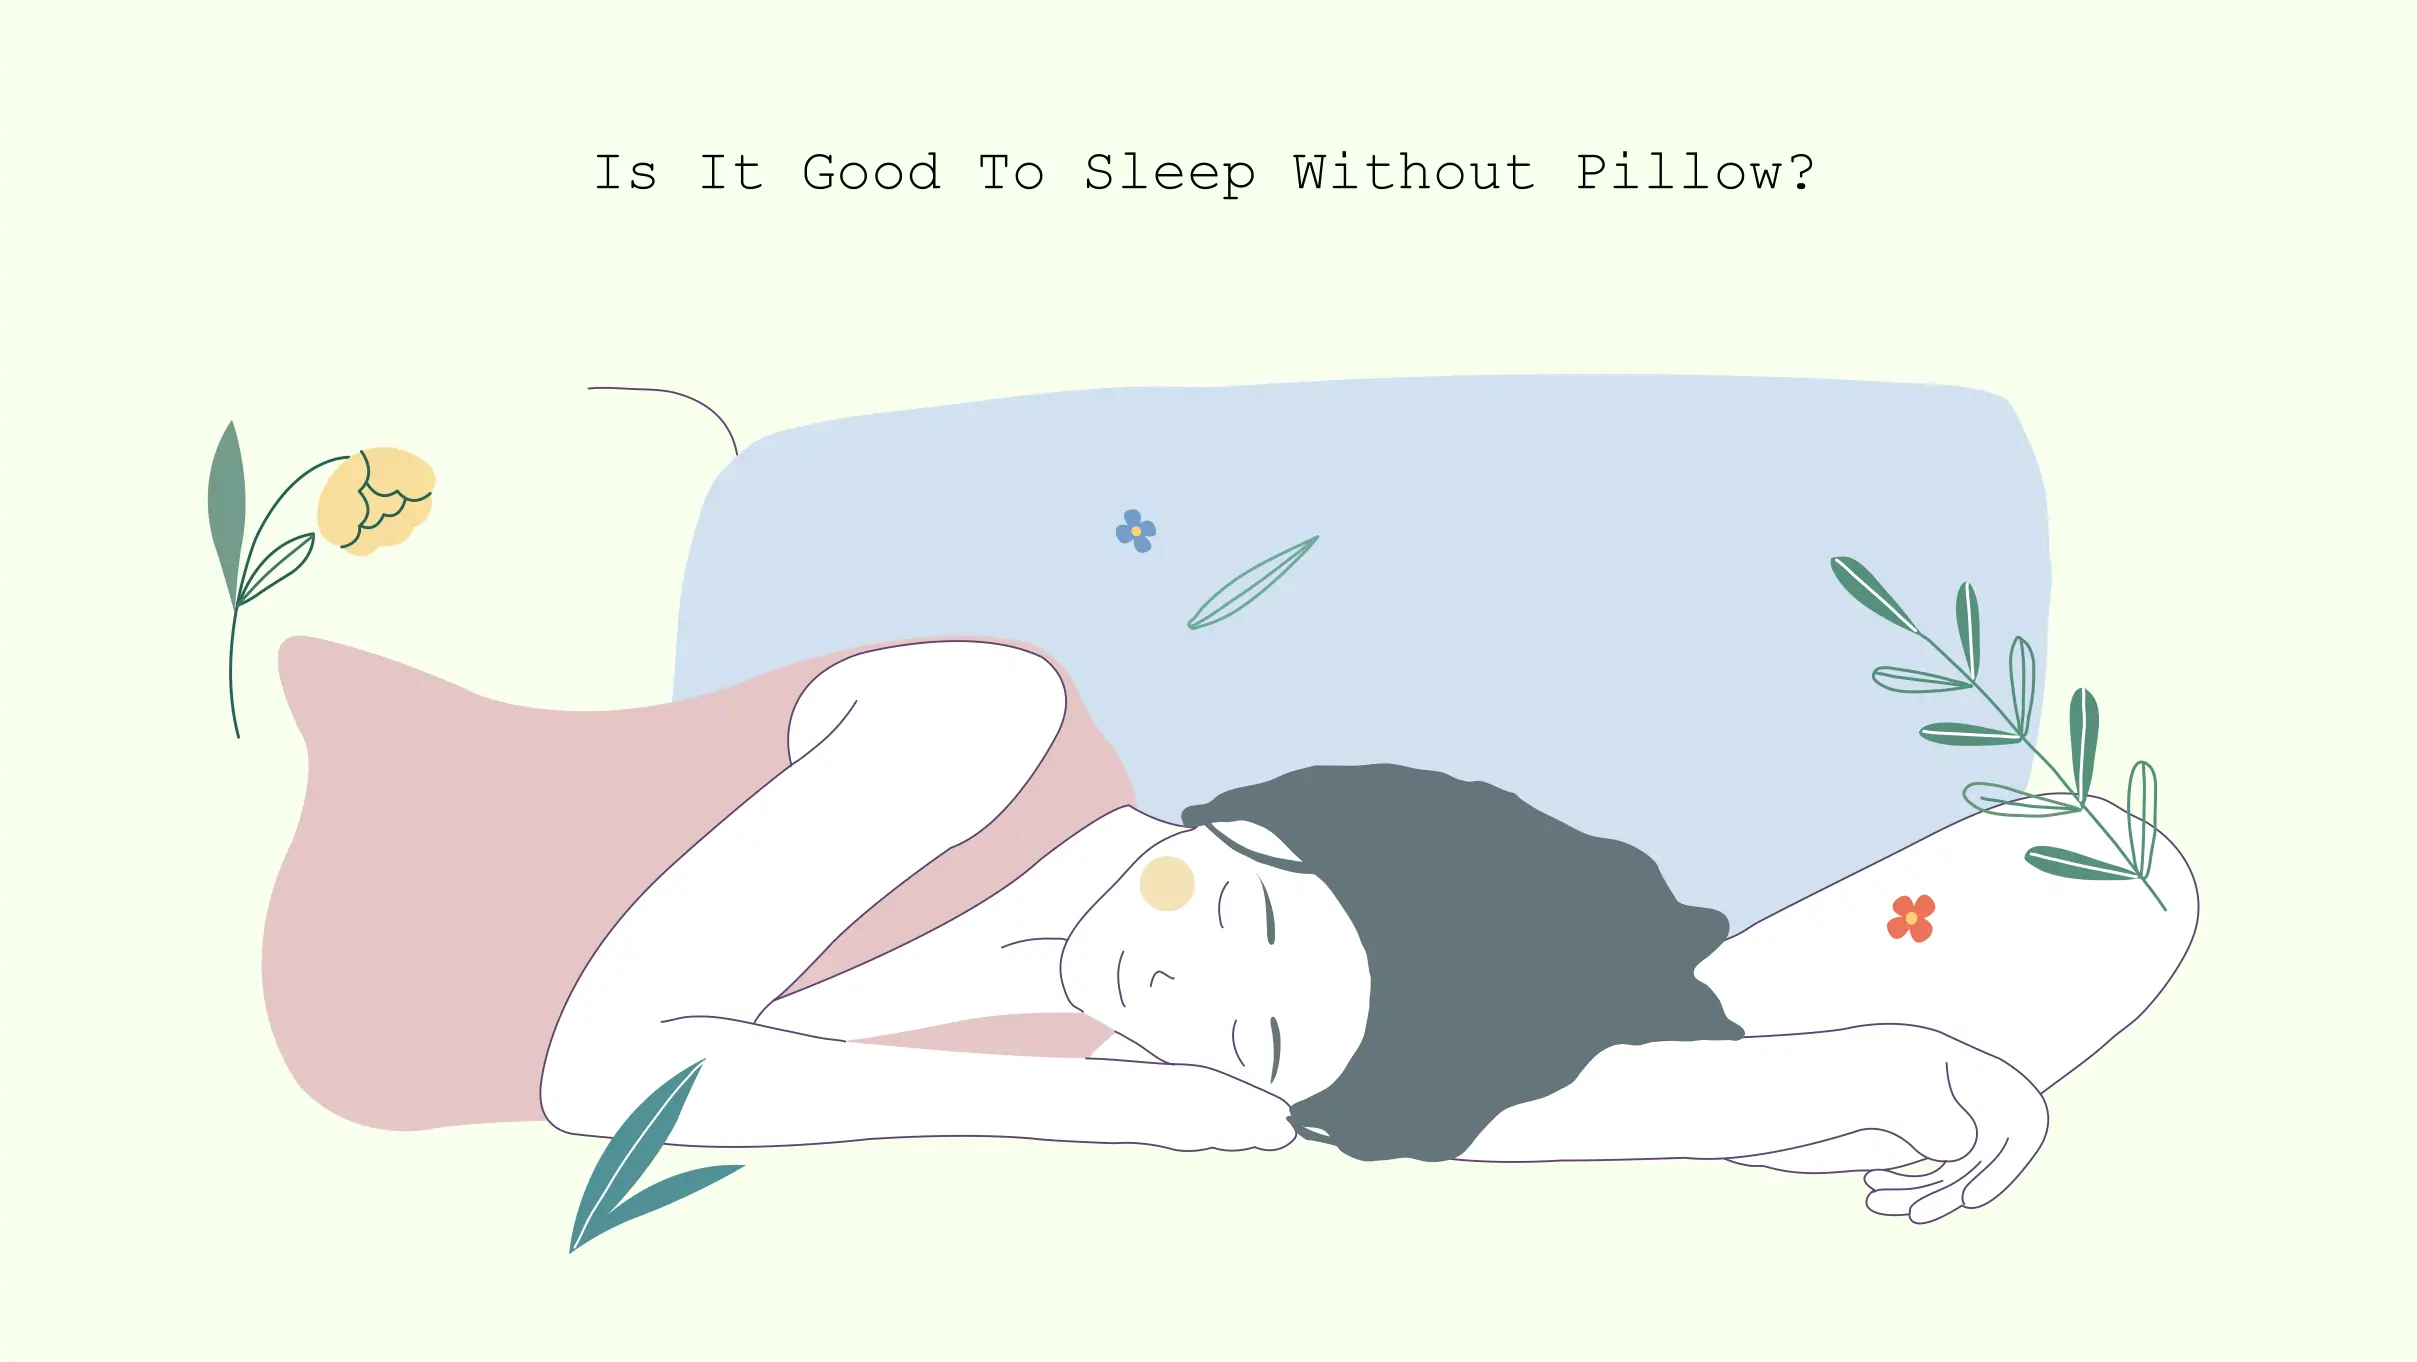 Sleeping Without a Pillow